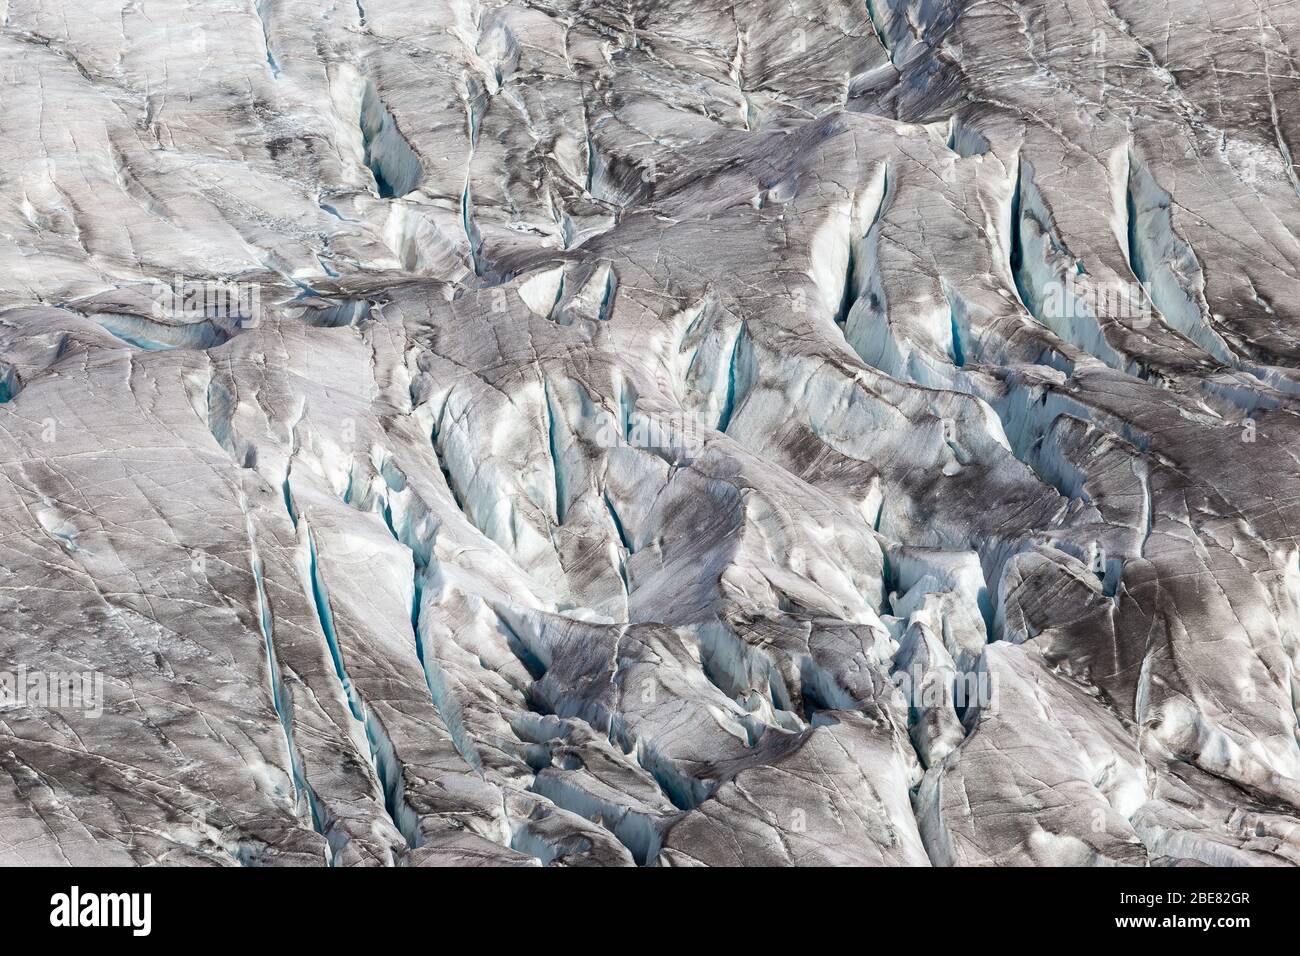 The Aletsch Glacier. Aletschgletscher. Glacier surface and crevasses.  Eastern Bernese Alps in the Swiss canton of Valais. Switzerland. Stock Photo